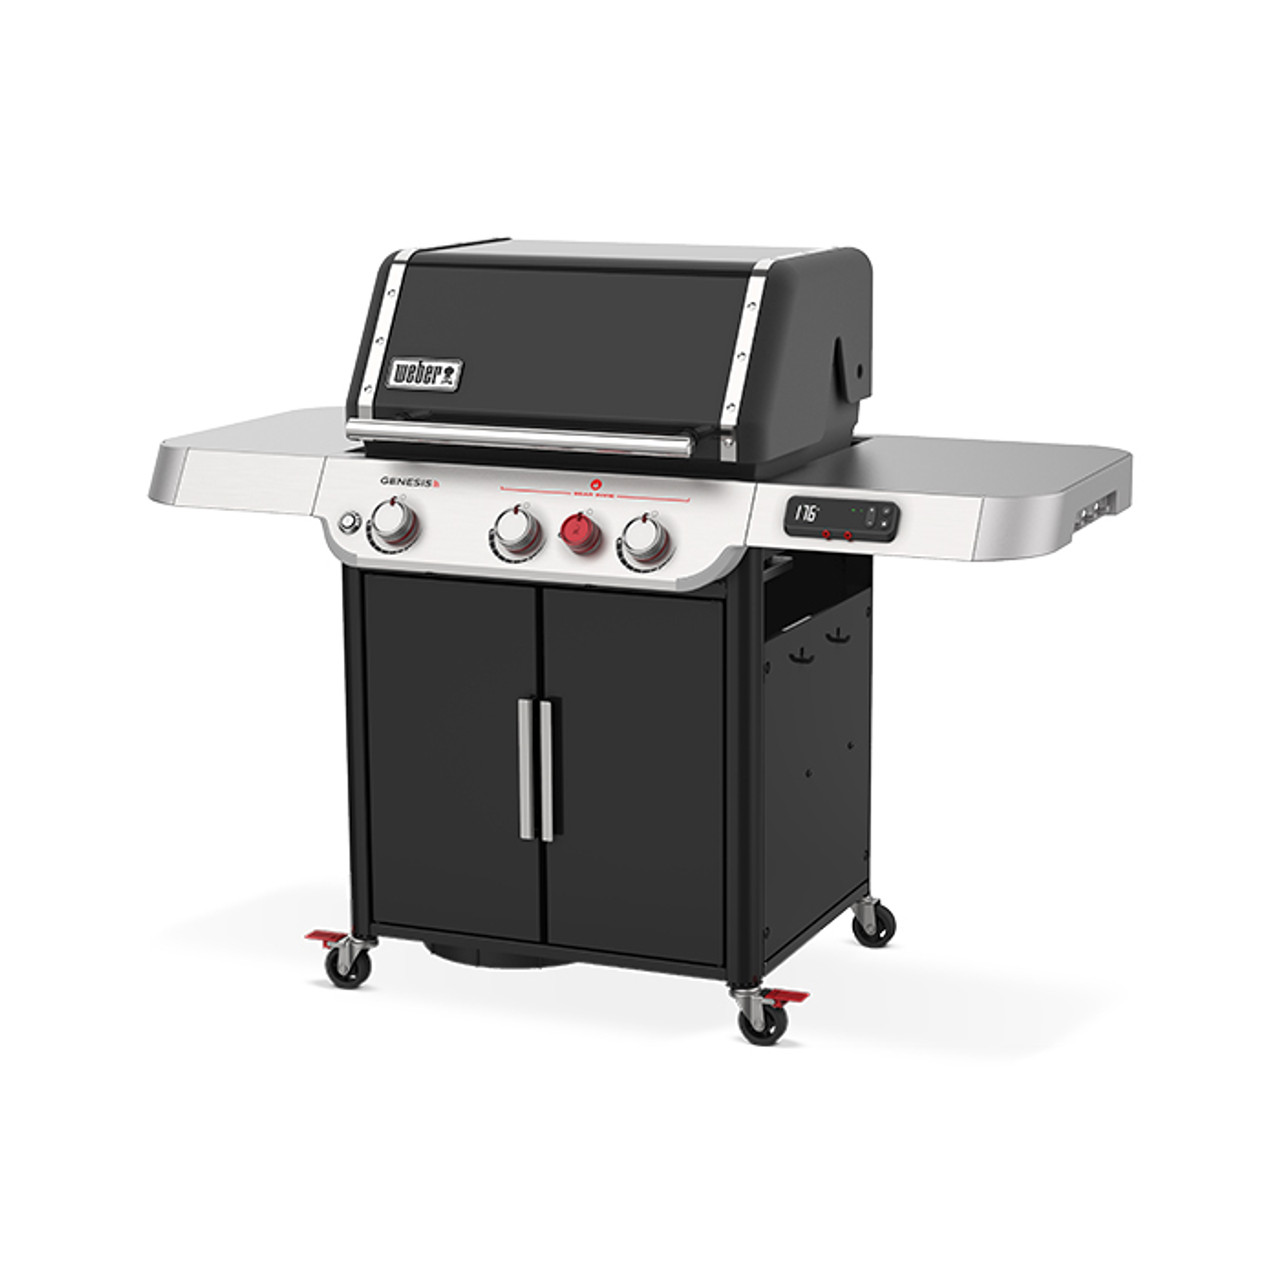 Genesis® EX-325s Smart Gas Barbecue *FREE ROASTER & THERMOMETER